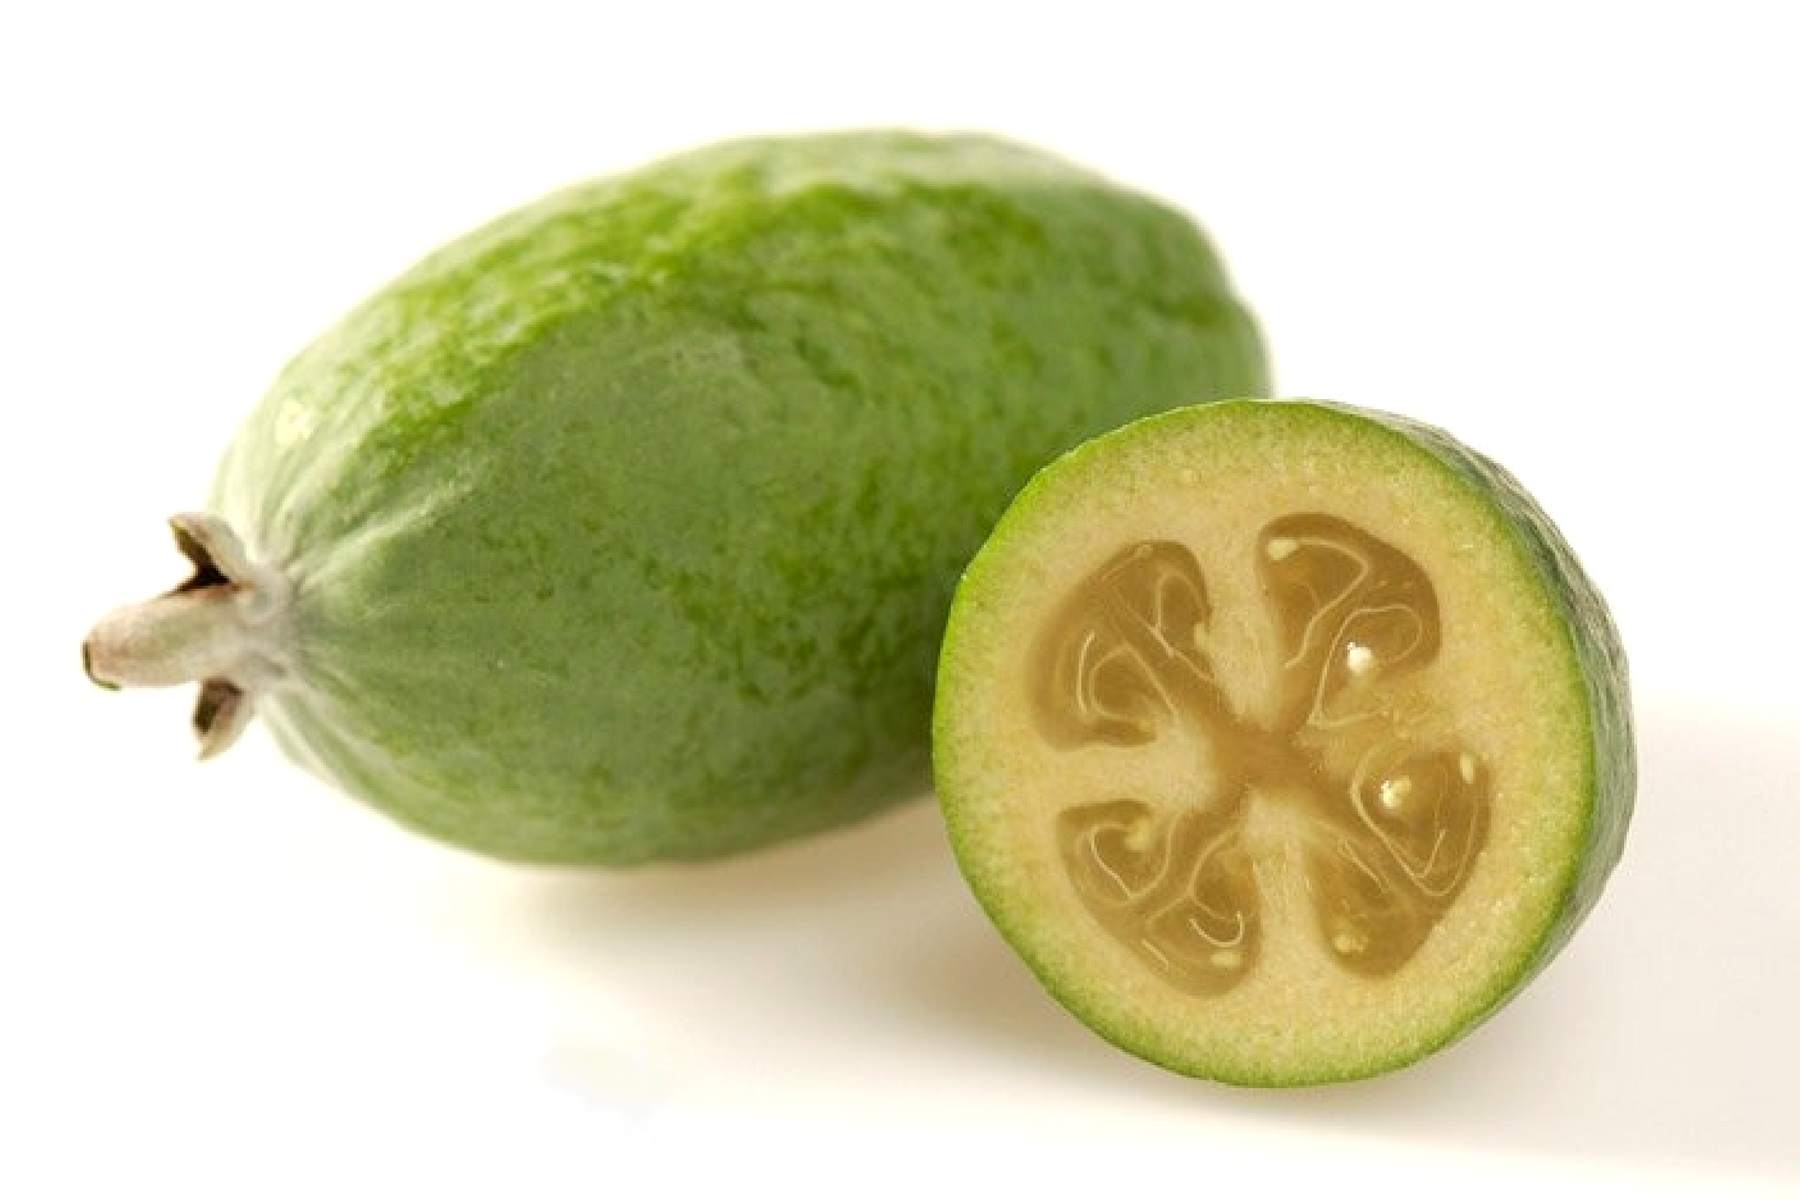 16 REMARKABLE BENEFITS OF PINEAPPLE GUAVA (FEIJOA)